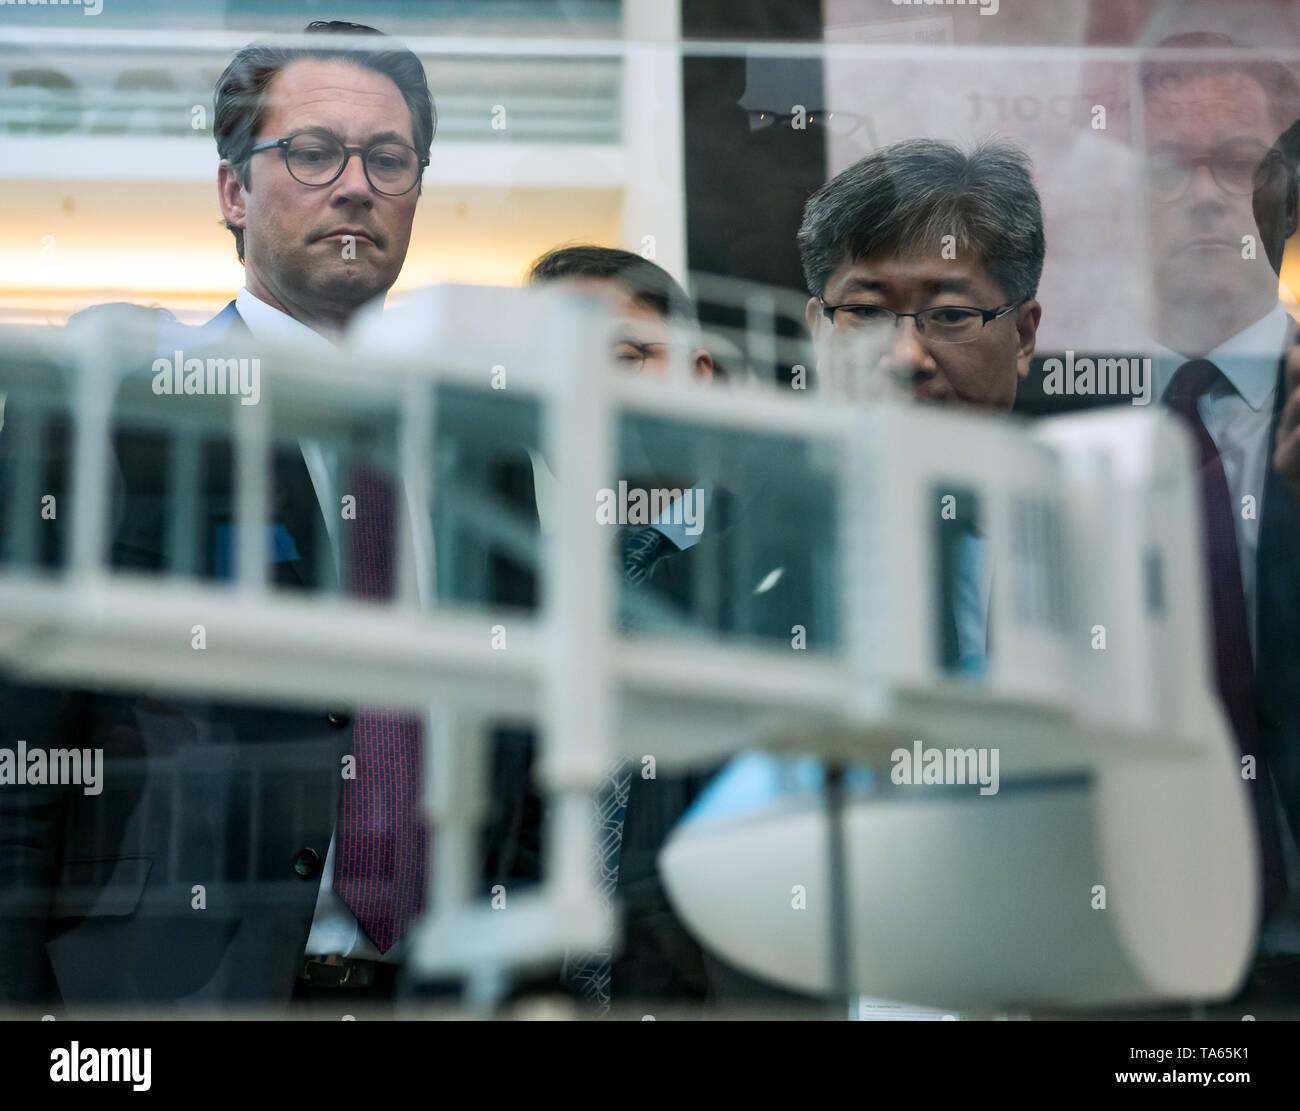 Leipzig, Germany. 22nd May, 2019. Andreas Scheuer (CSU, l), Federal Minister of Transport, and Young Tae Kim, Secretary General of the International Transport Forum (ITF), will look at the model of a Gangwy at the Korean stand during their tour of the International Transport Forum in Leipzig. Around 1300 scientists and politicians from 70 countries will discuss the mobility of the future at the International Transport Forum. This year, the three-day conference will focus on concepts that bring city and country closer together. Credit: Hendrik Schmidt/dpa-Zentralbild/dpa/Alamy Live News Stock Photo